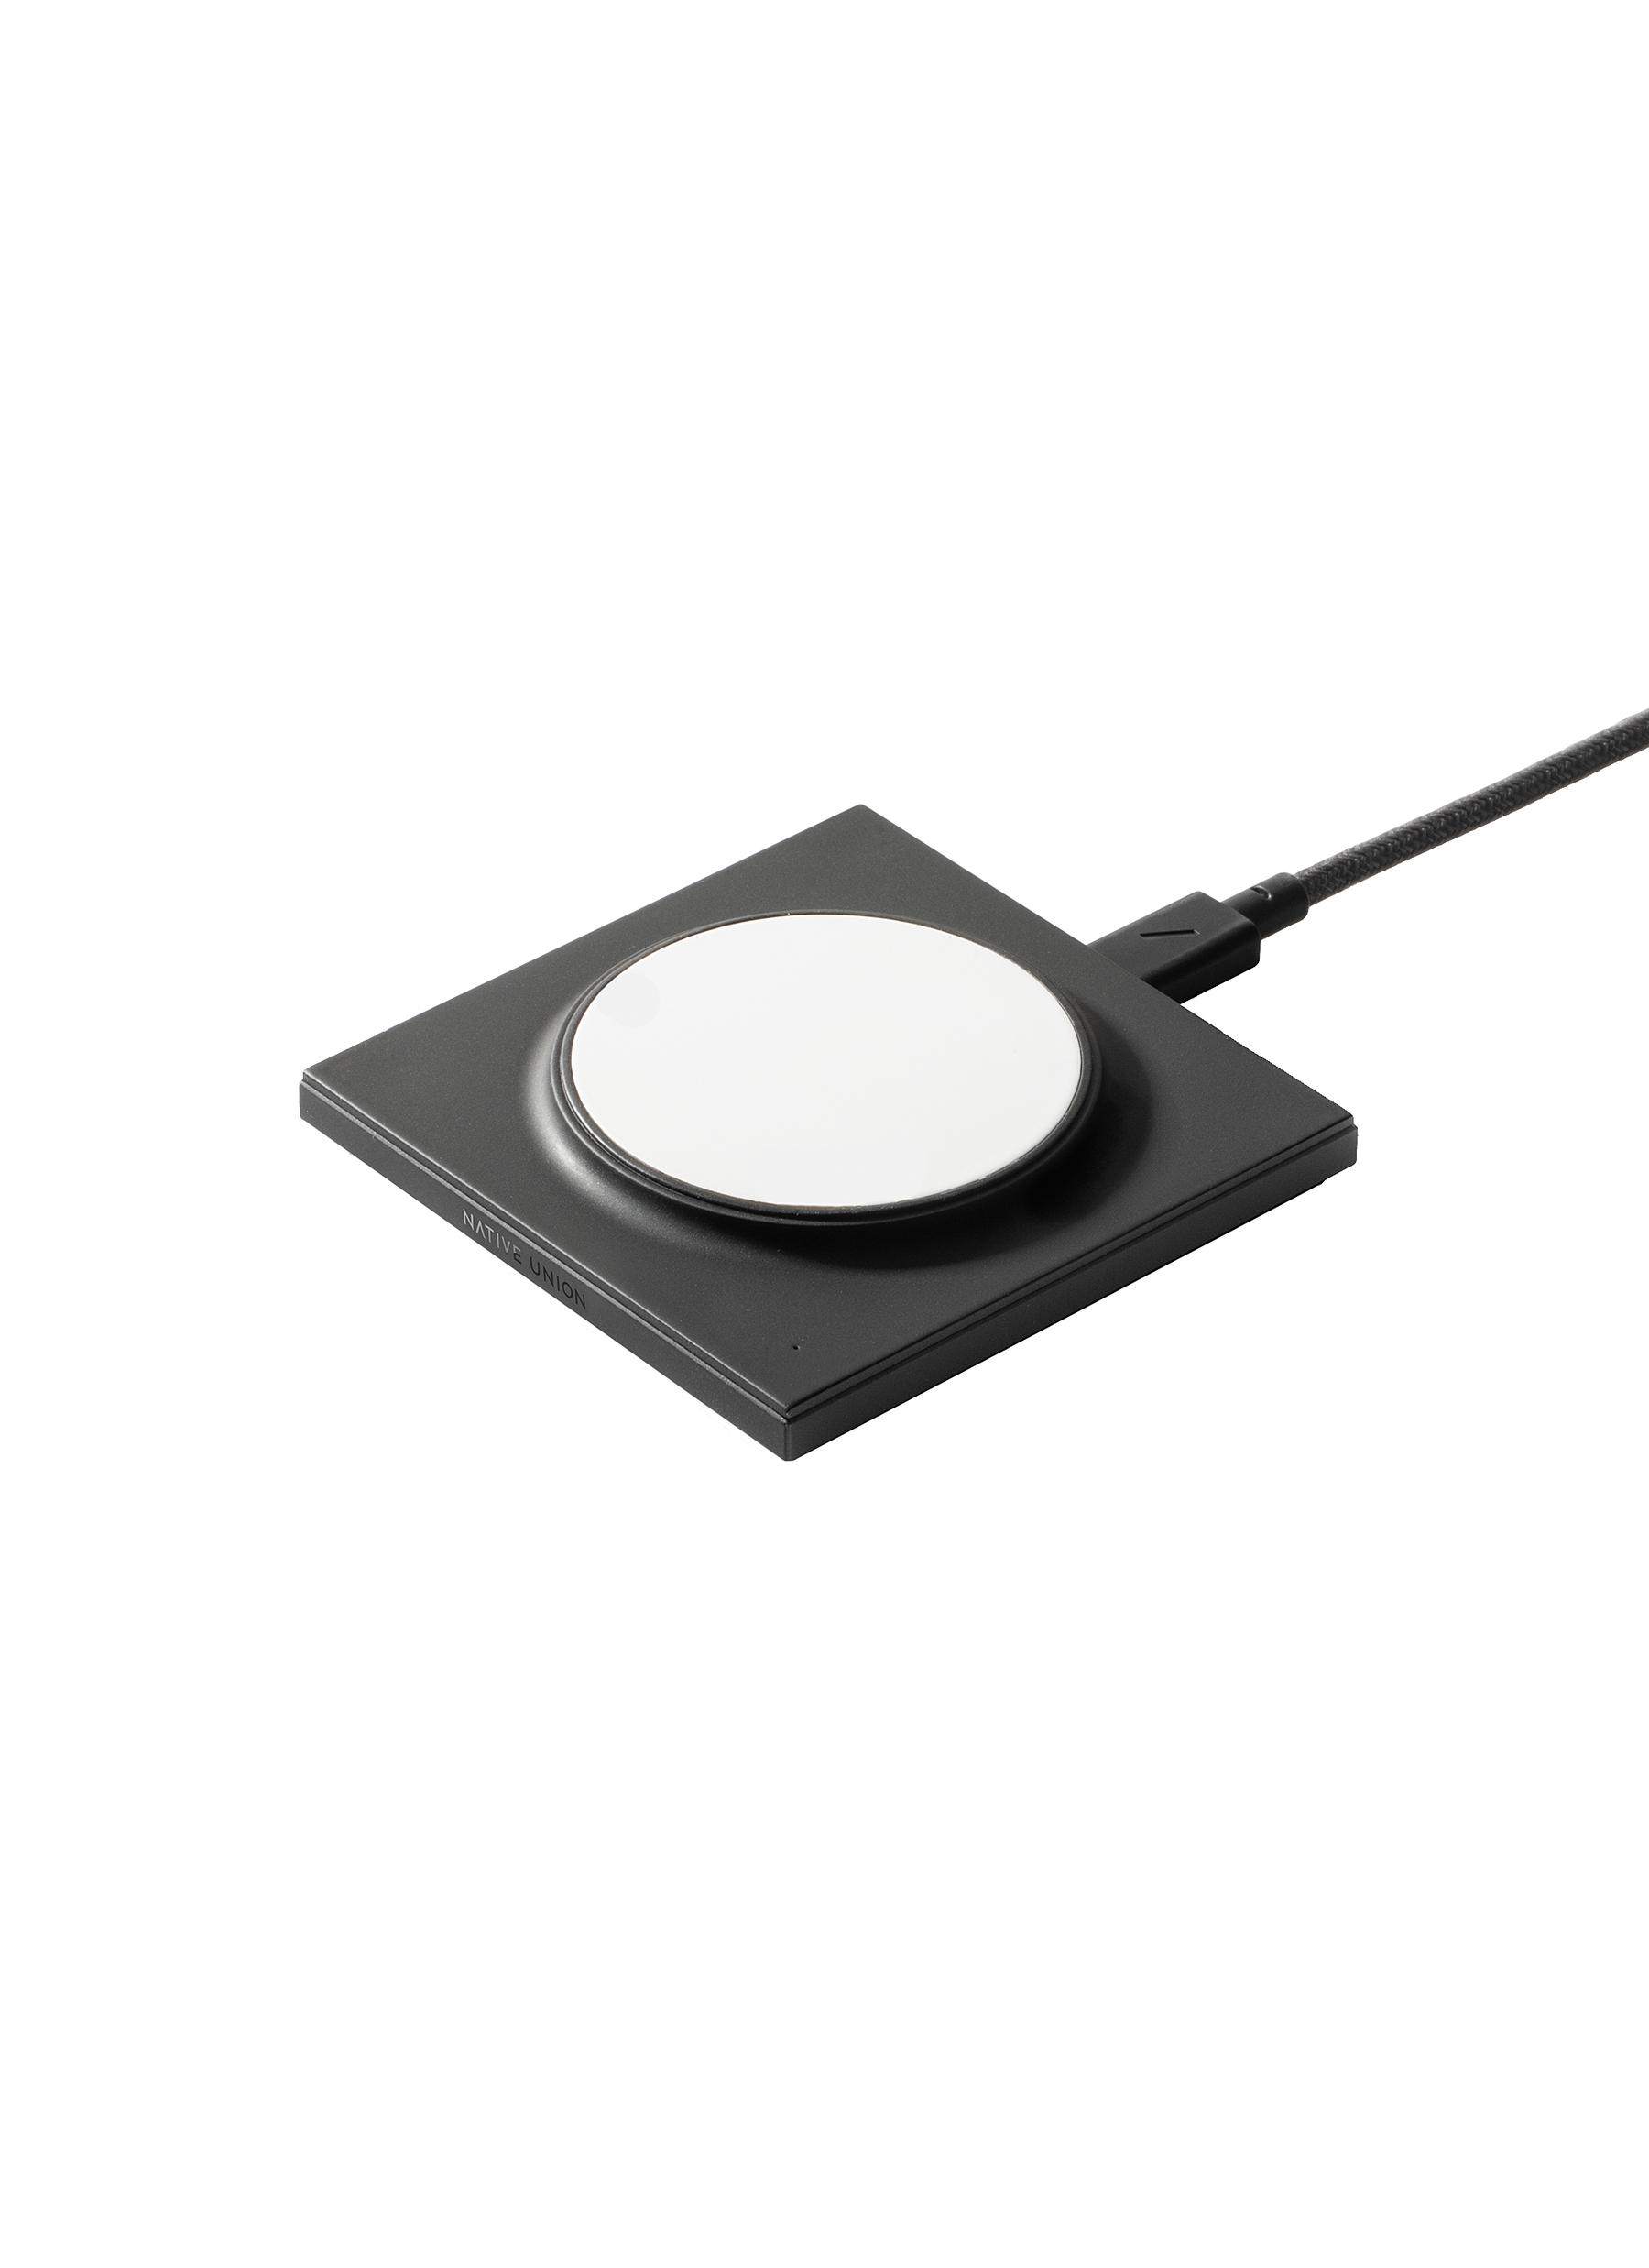 Drop Magnetic Wireless Charger - Black